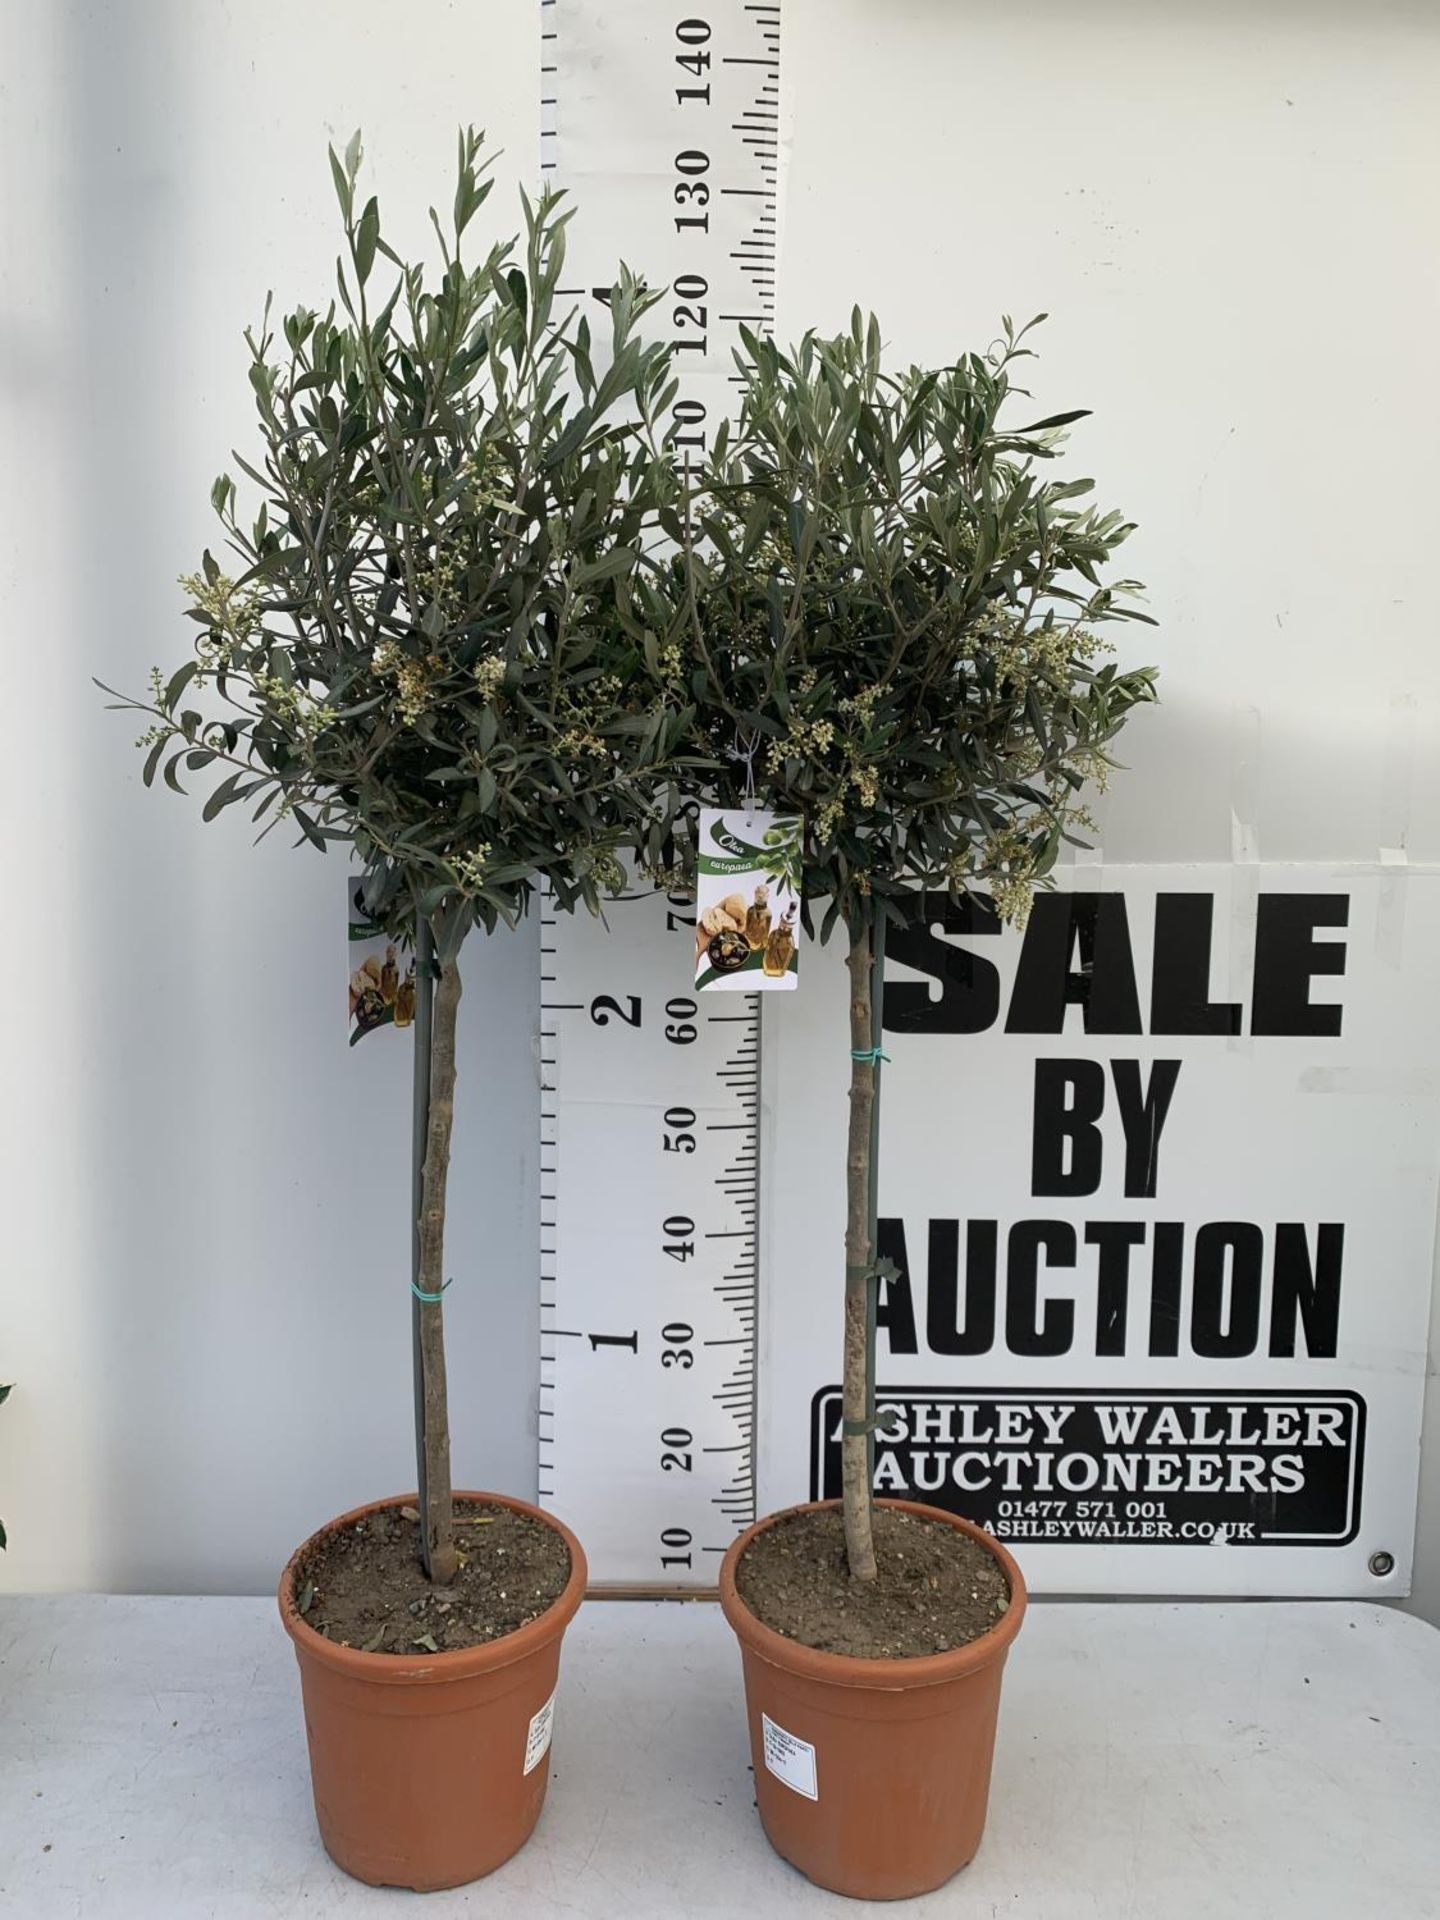 TWO OLIVE EUROPEA STANDARD TREES APPROX 120CM IN HEIGHT IN 3LTR POTS NO VAT TO BE SOLD FOR THE TWO - Image 2 of 6